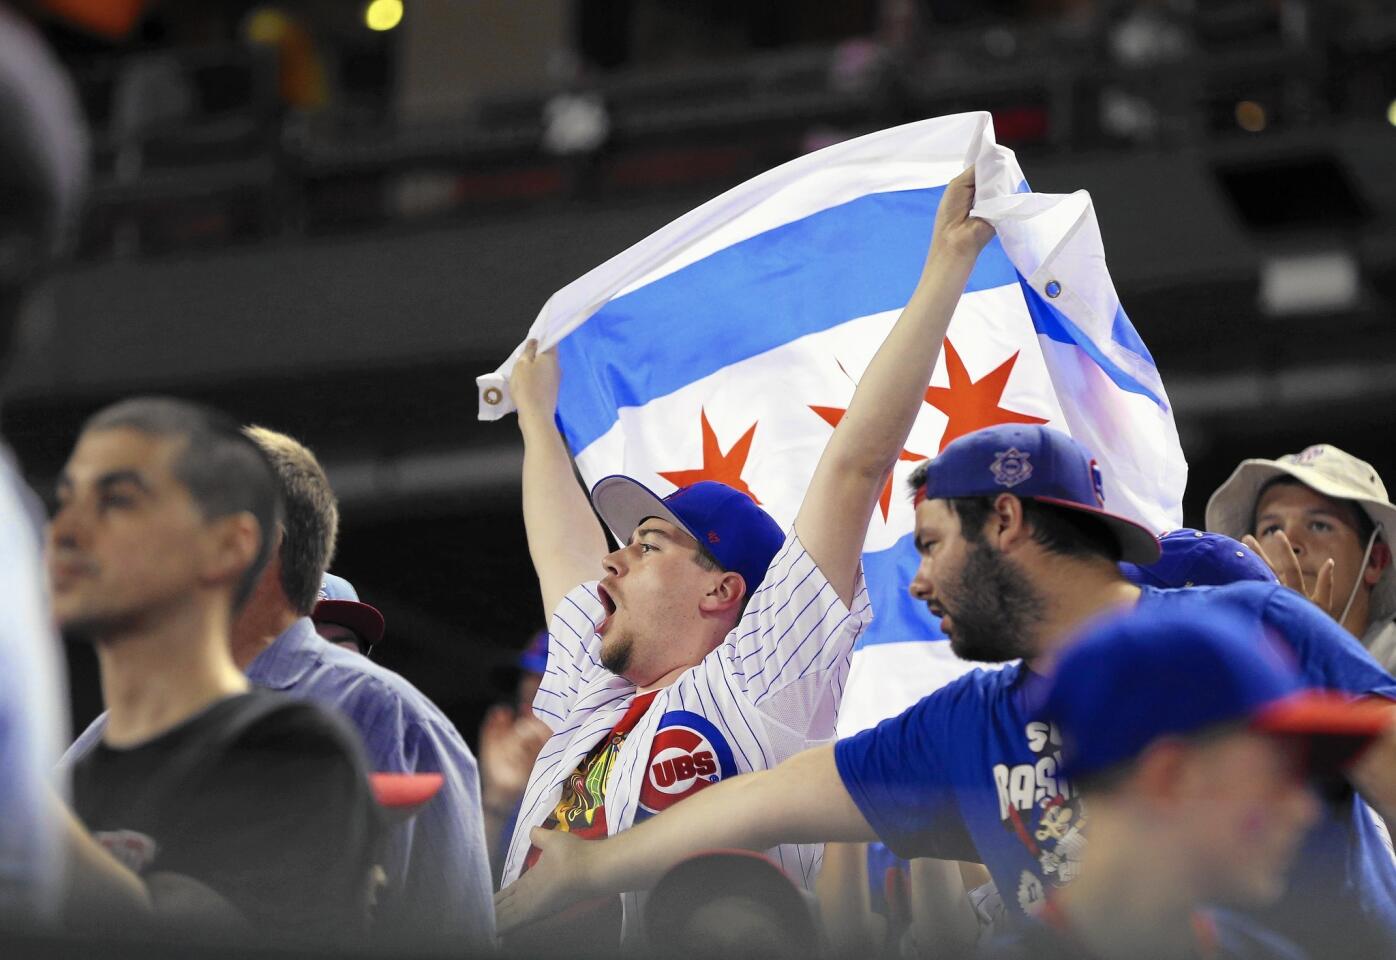 Chicago Cubs fans show their pride in St. Louis during an early-season game against the Cardinals.